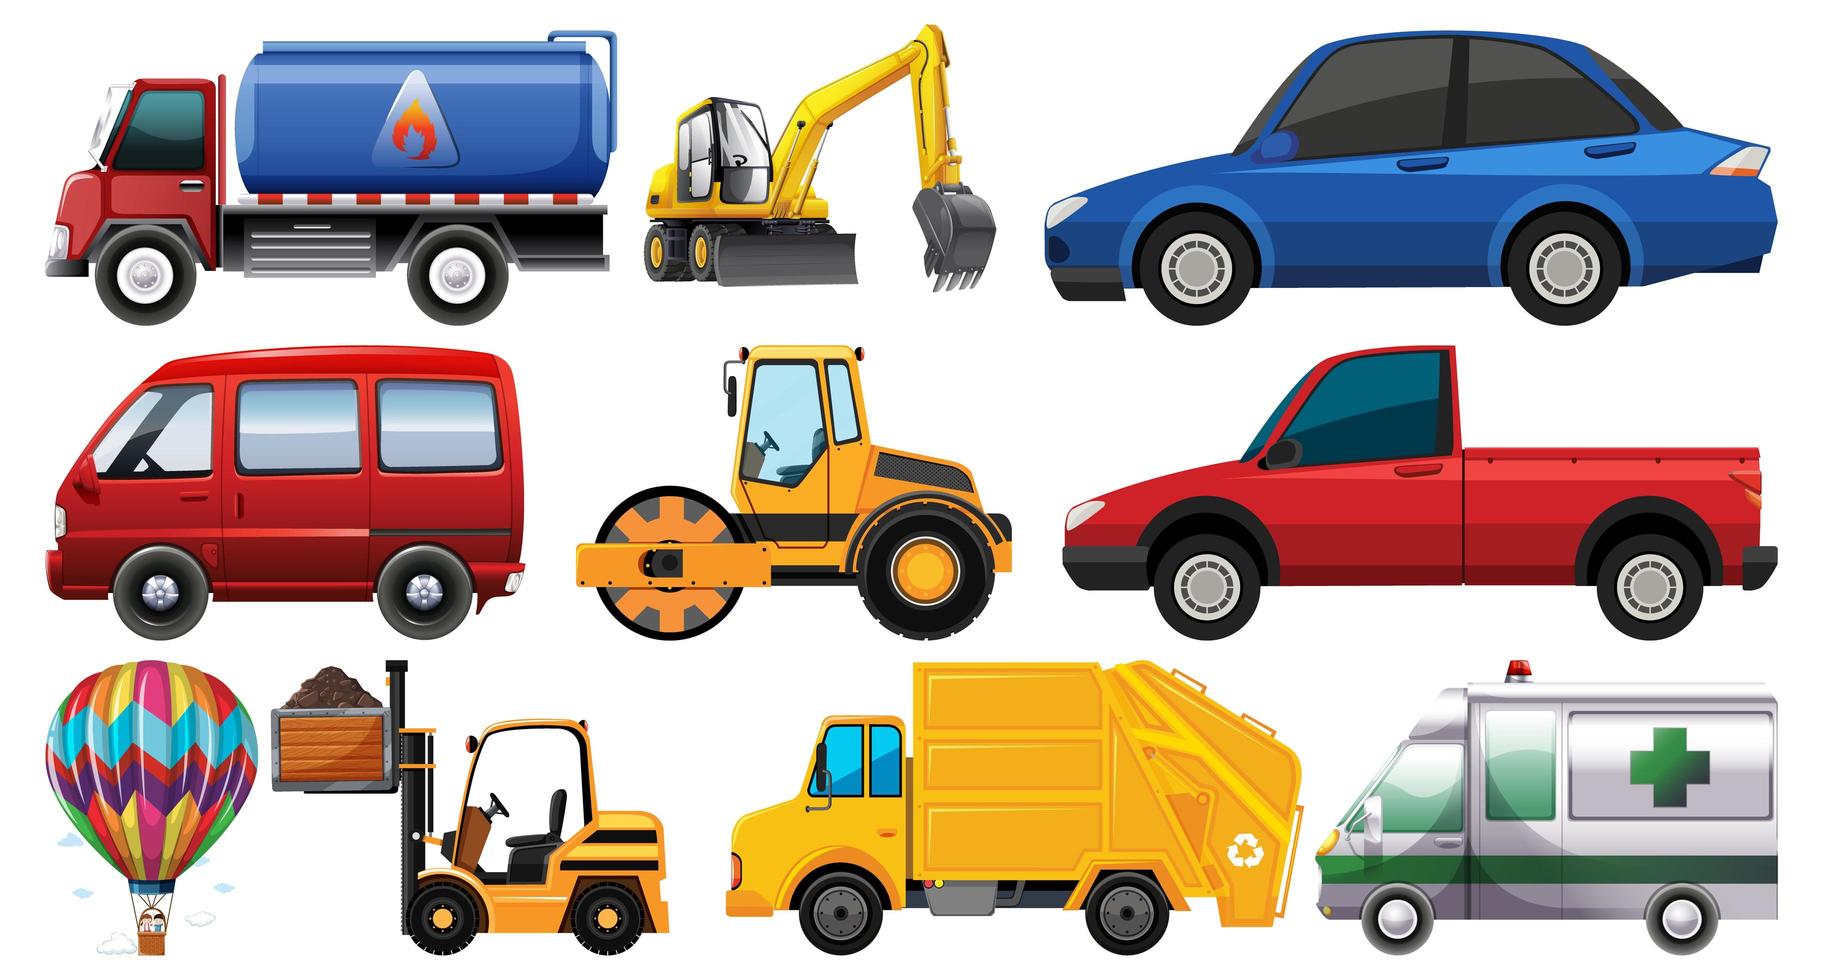 Set of different kind of cars and trucks isolated on white background vector